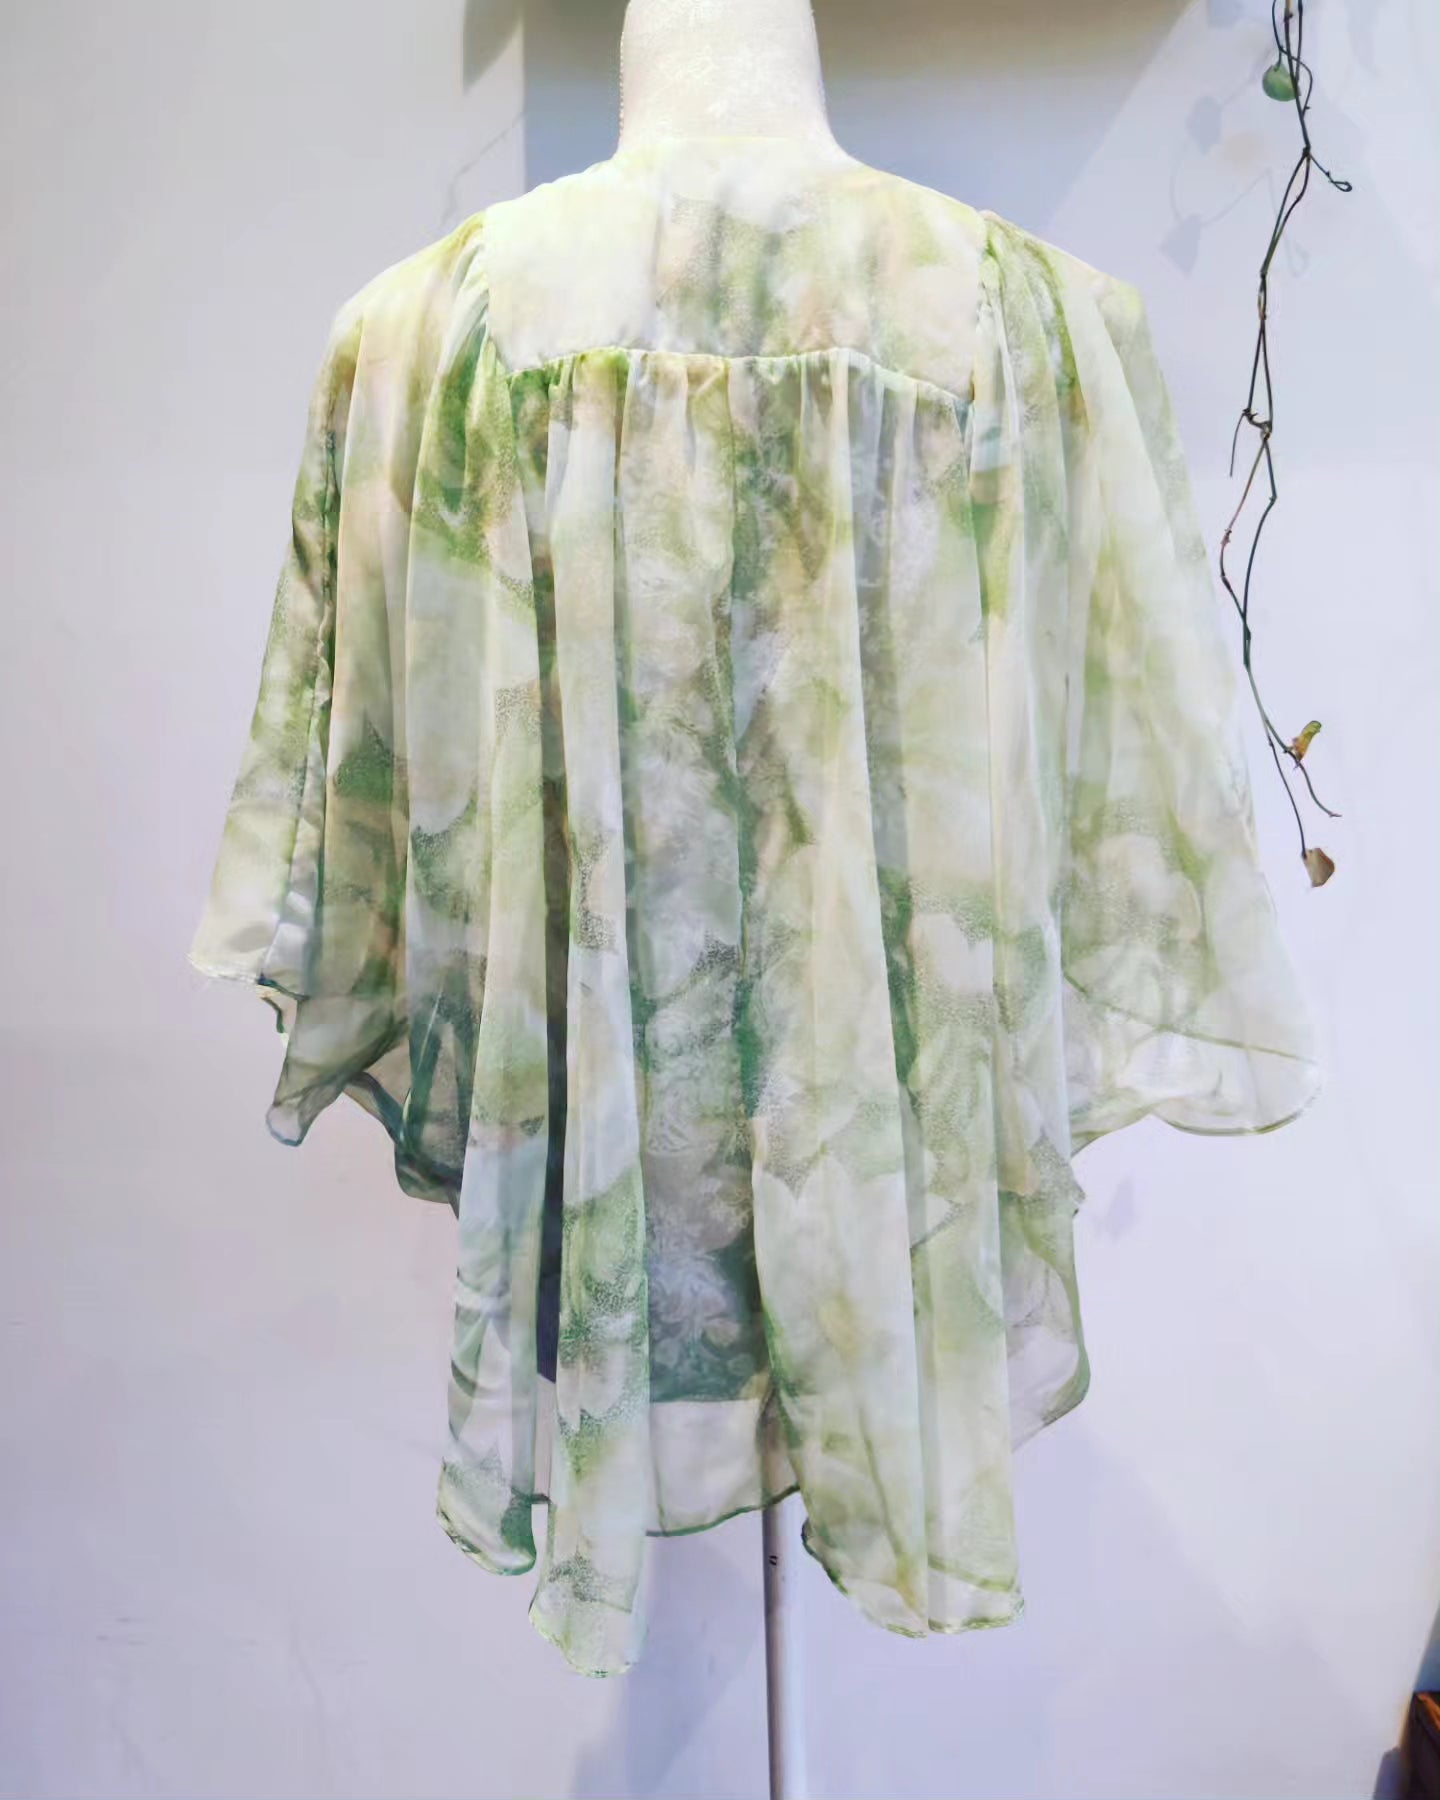 Stunning 70s butterfly wing top. Small- medium.